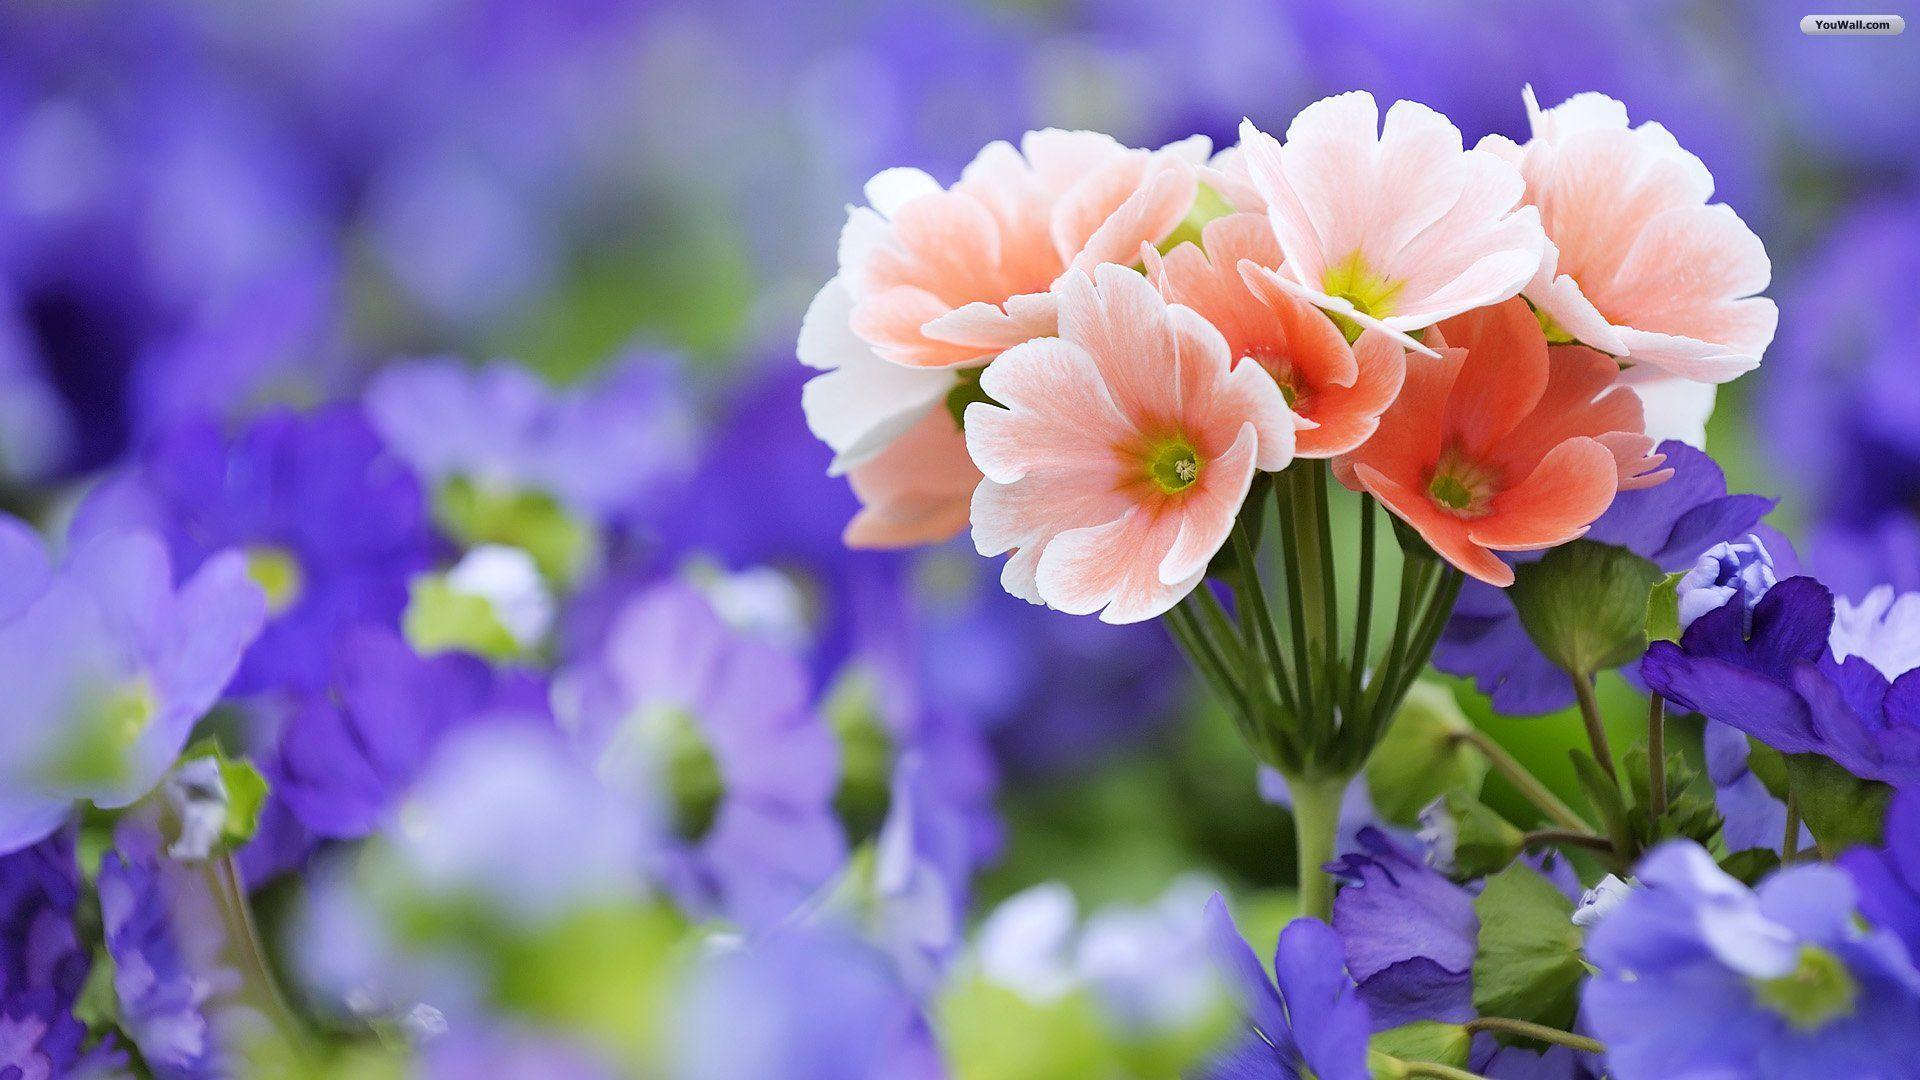 Free 800x600 Pretty Flower Wallpaper / Background To Download